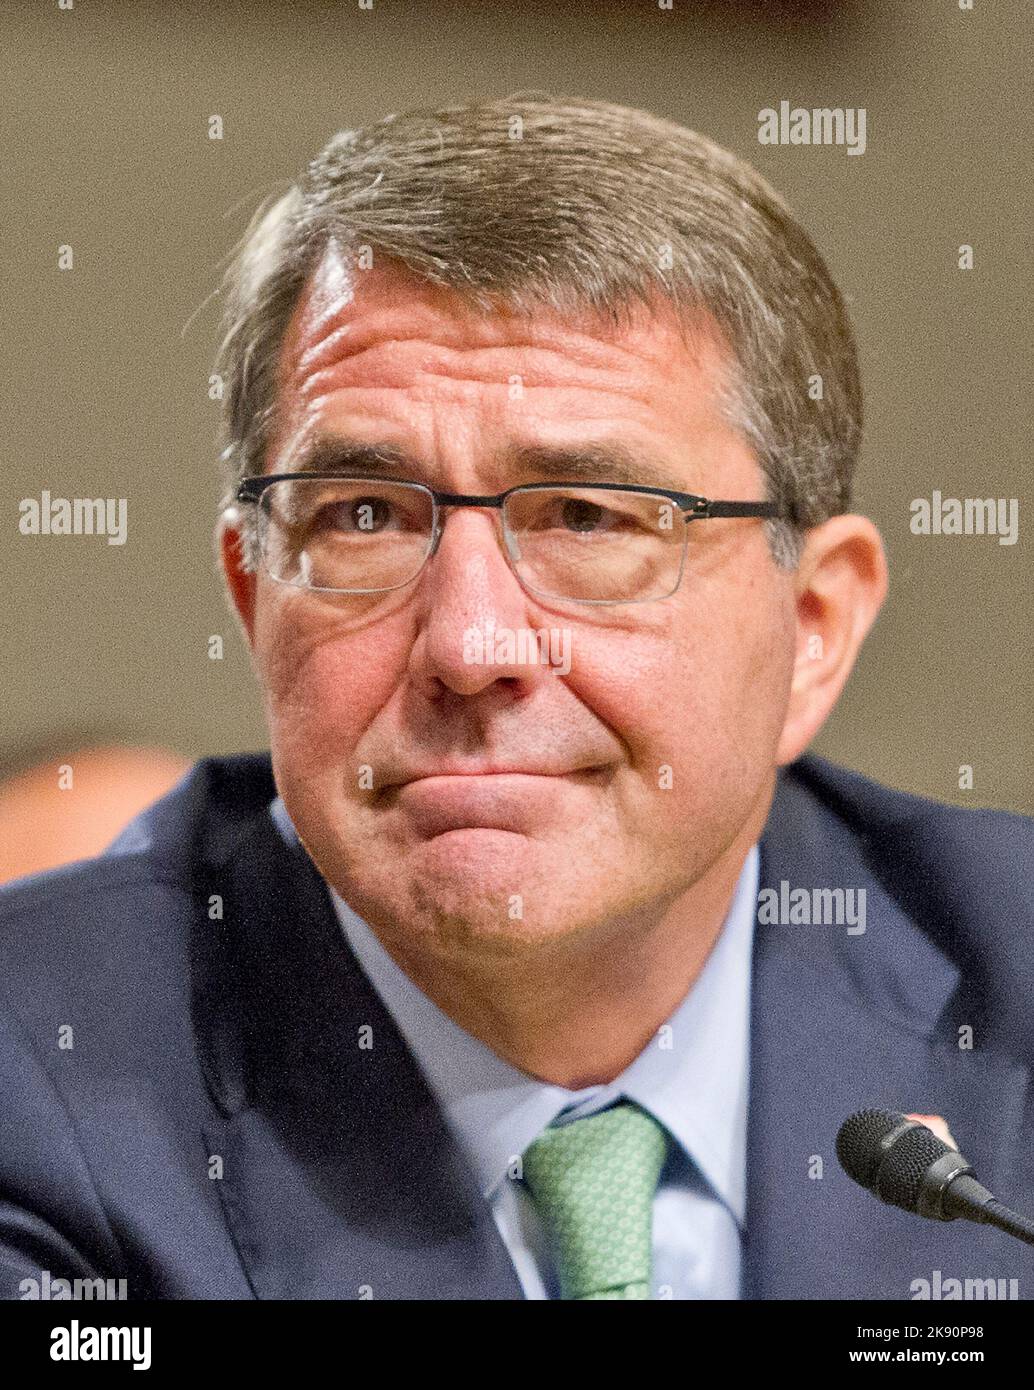 United States Secretary of Defense Ashton Carter gives testimony before the US Senate Committee on Armed Services concerning 'Impacts of the Joint Comprehensive Plan of Action (JCPOA) on U.S. Interests and the Military Balance in the Middle East' on Capitol Hill on Wednesday, July 29, 2015.Credit: Ron Sachs/CNP /MediaPunch Stock Photo